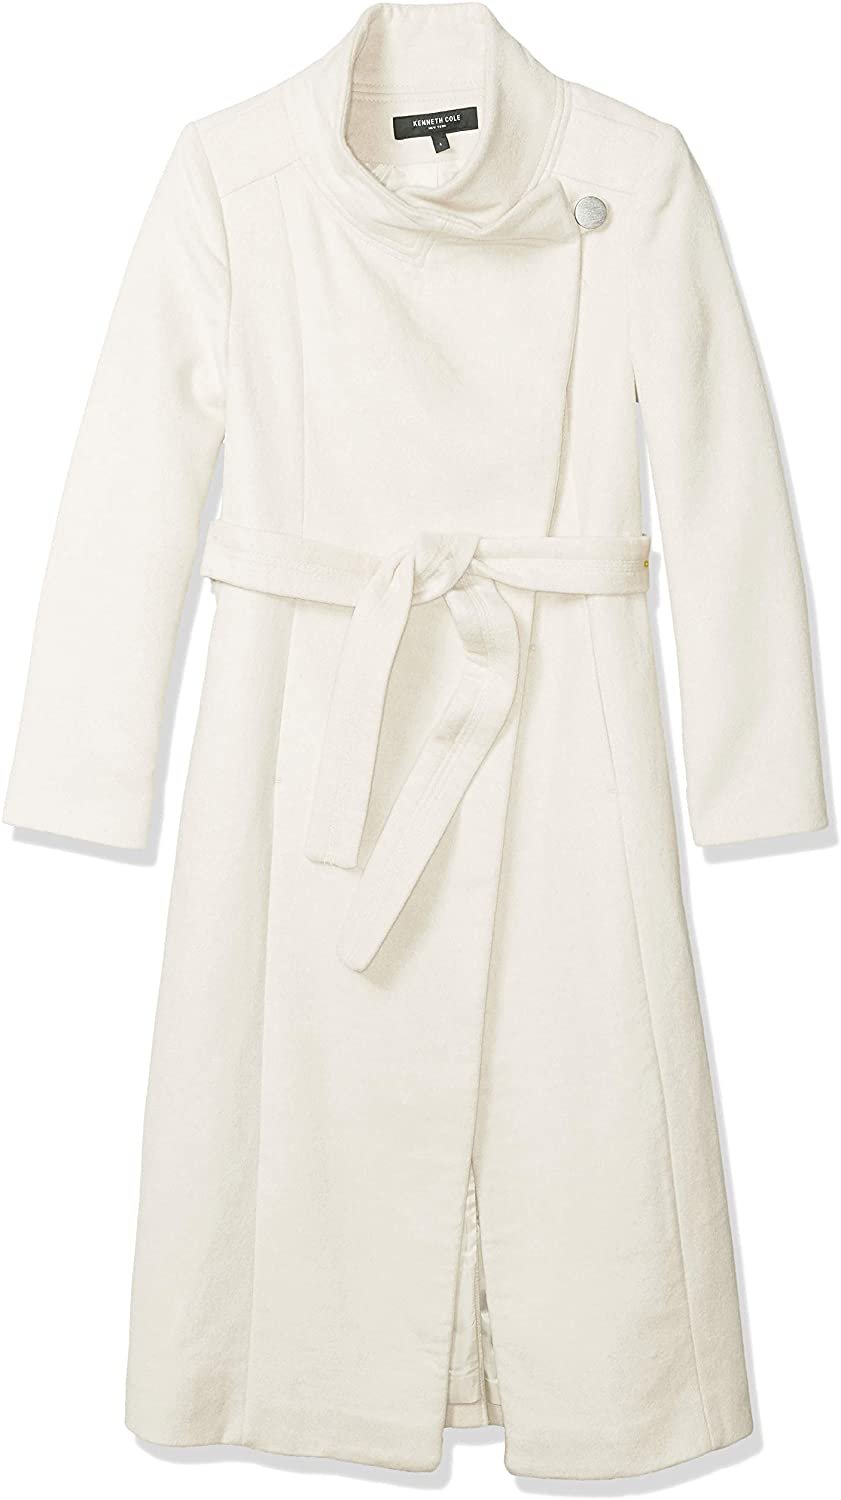 Kenneth Cole New York Women's Full Length Button Fencer Coat with Belt